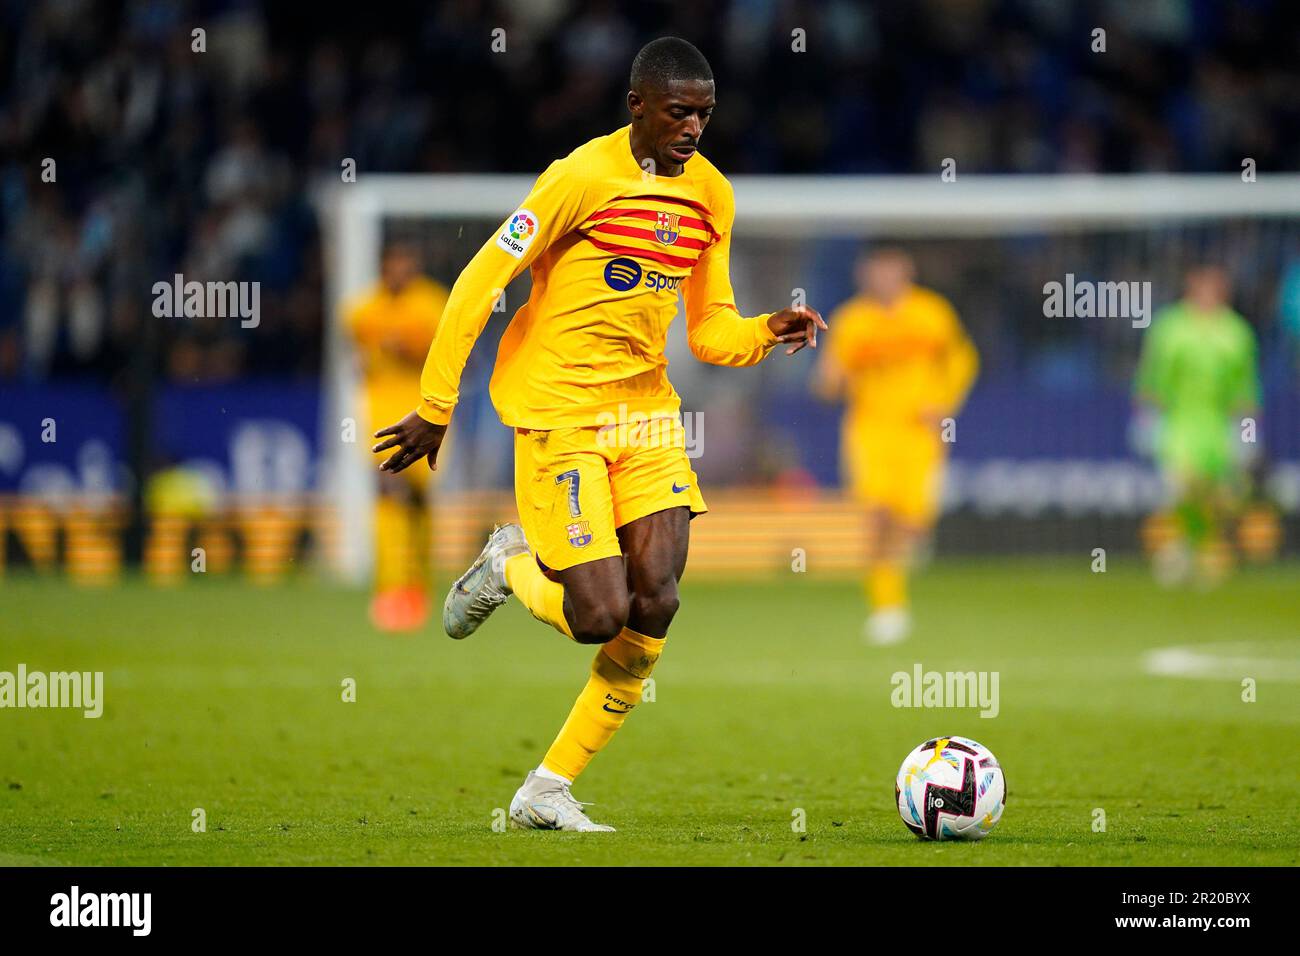 Ousmane Dembele of FC Barcelona  during the La Liga match between RCD Espanyol and FC Barcelona played at RCDE Stadium on May 14 in Barcelona, Spain. (Photo by Sergio Ruiz / PRESSIN) Stock Photo